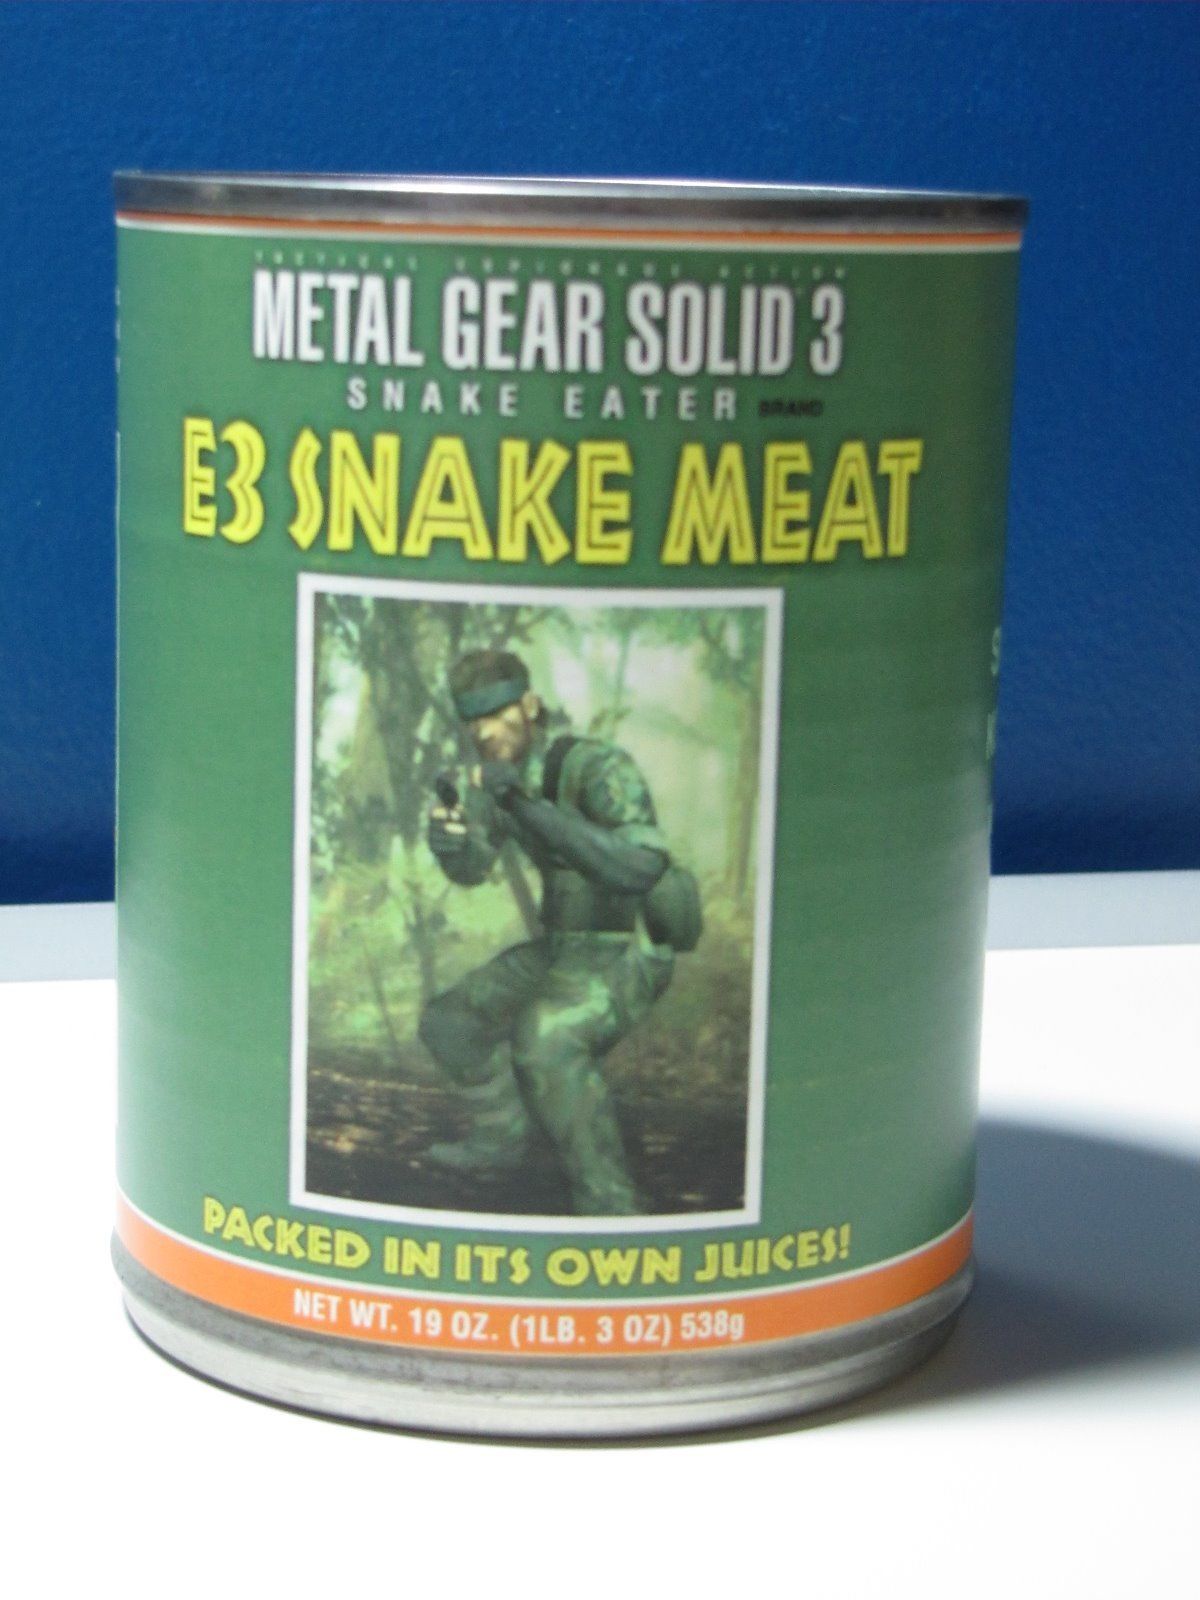 METAL GEAR SOLID 3 E3 2004 Snake Meat Can rare promo